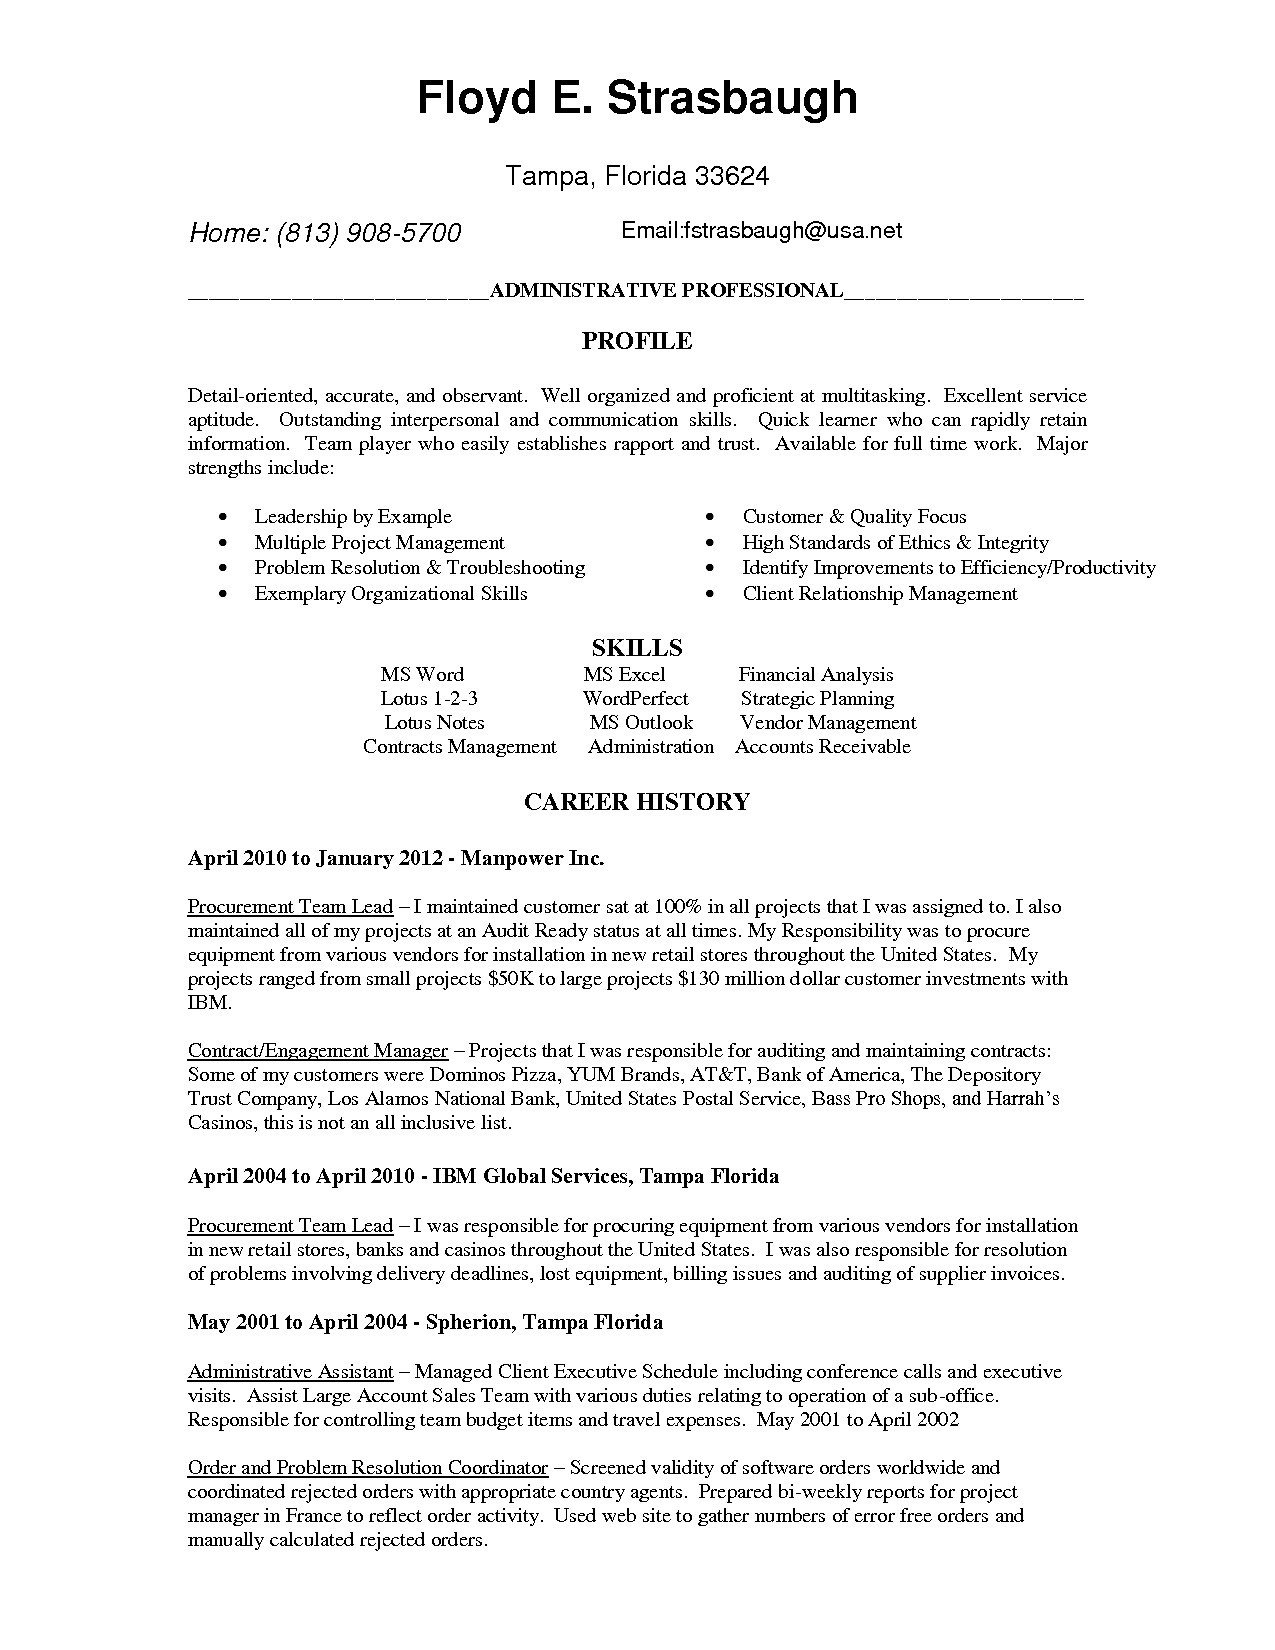 Job Cover Letter Template Word - Ficial Letter Template Word New English Letter Template Word Copy